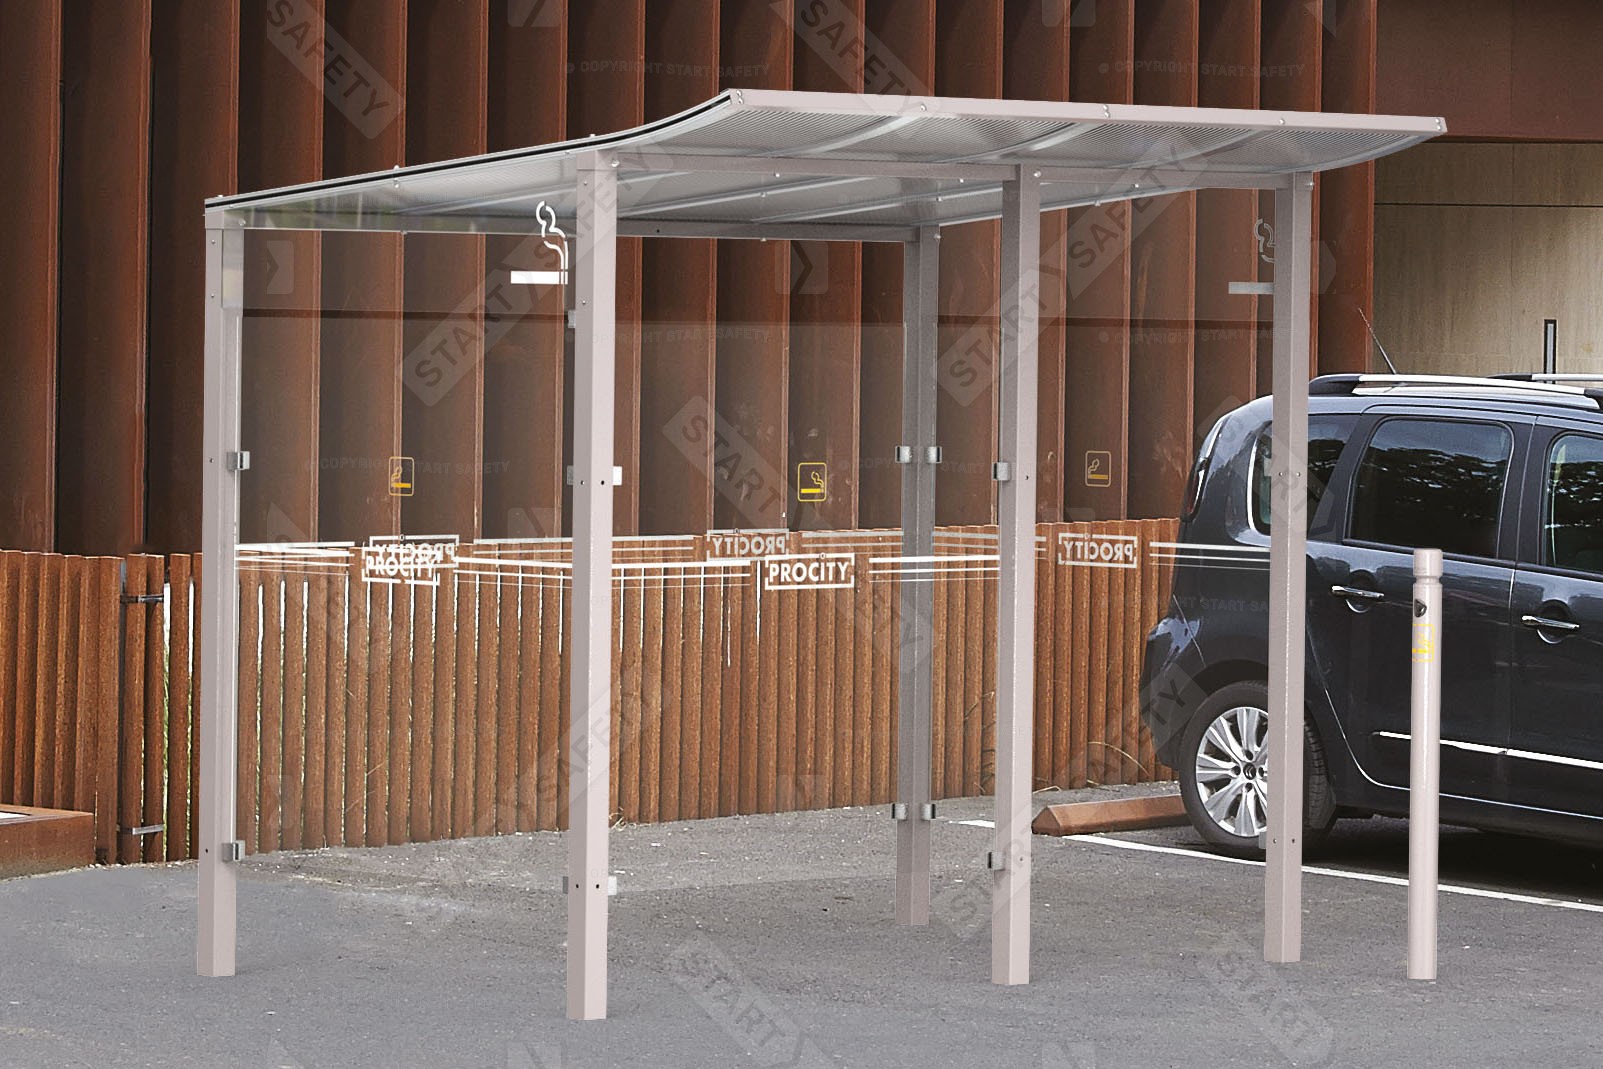 Procity Modulo Smoking and Vaping Shelter Installed With Cigarette Decals on Its Sides